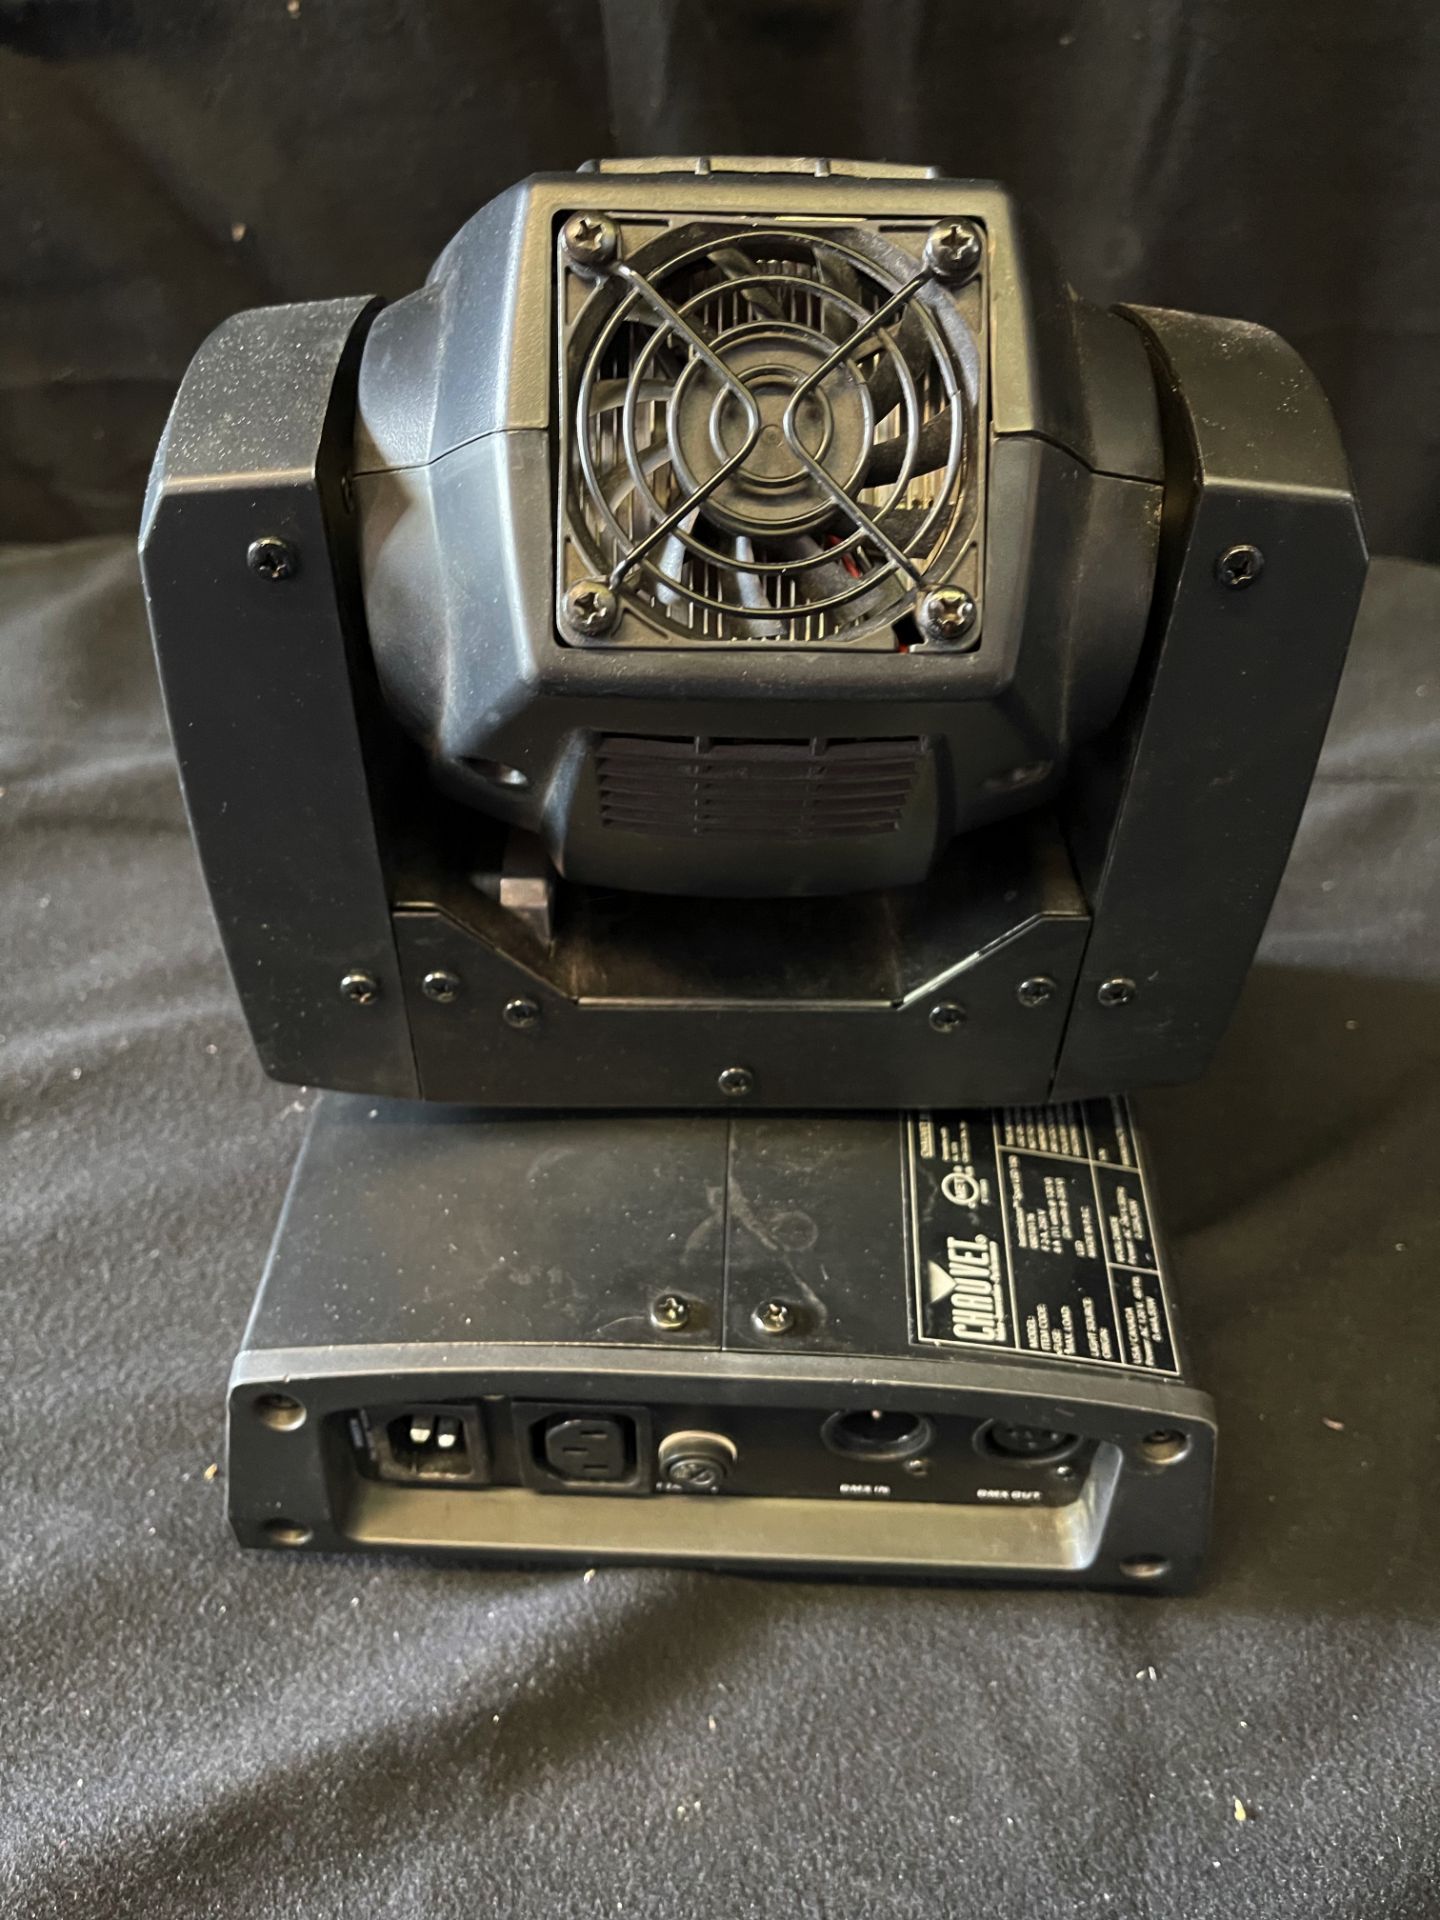 A Chauvet Intimidator 150 Moving Head Light, good condition, tested and working. - Image 2 of 2